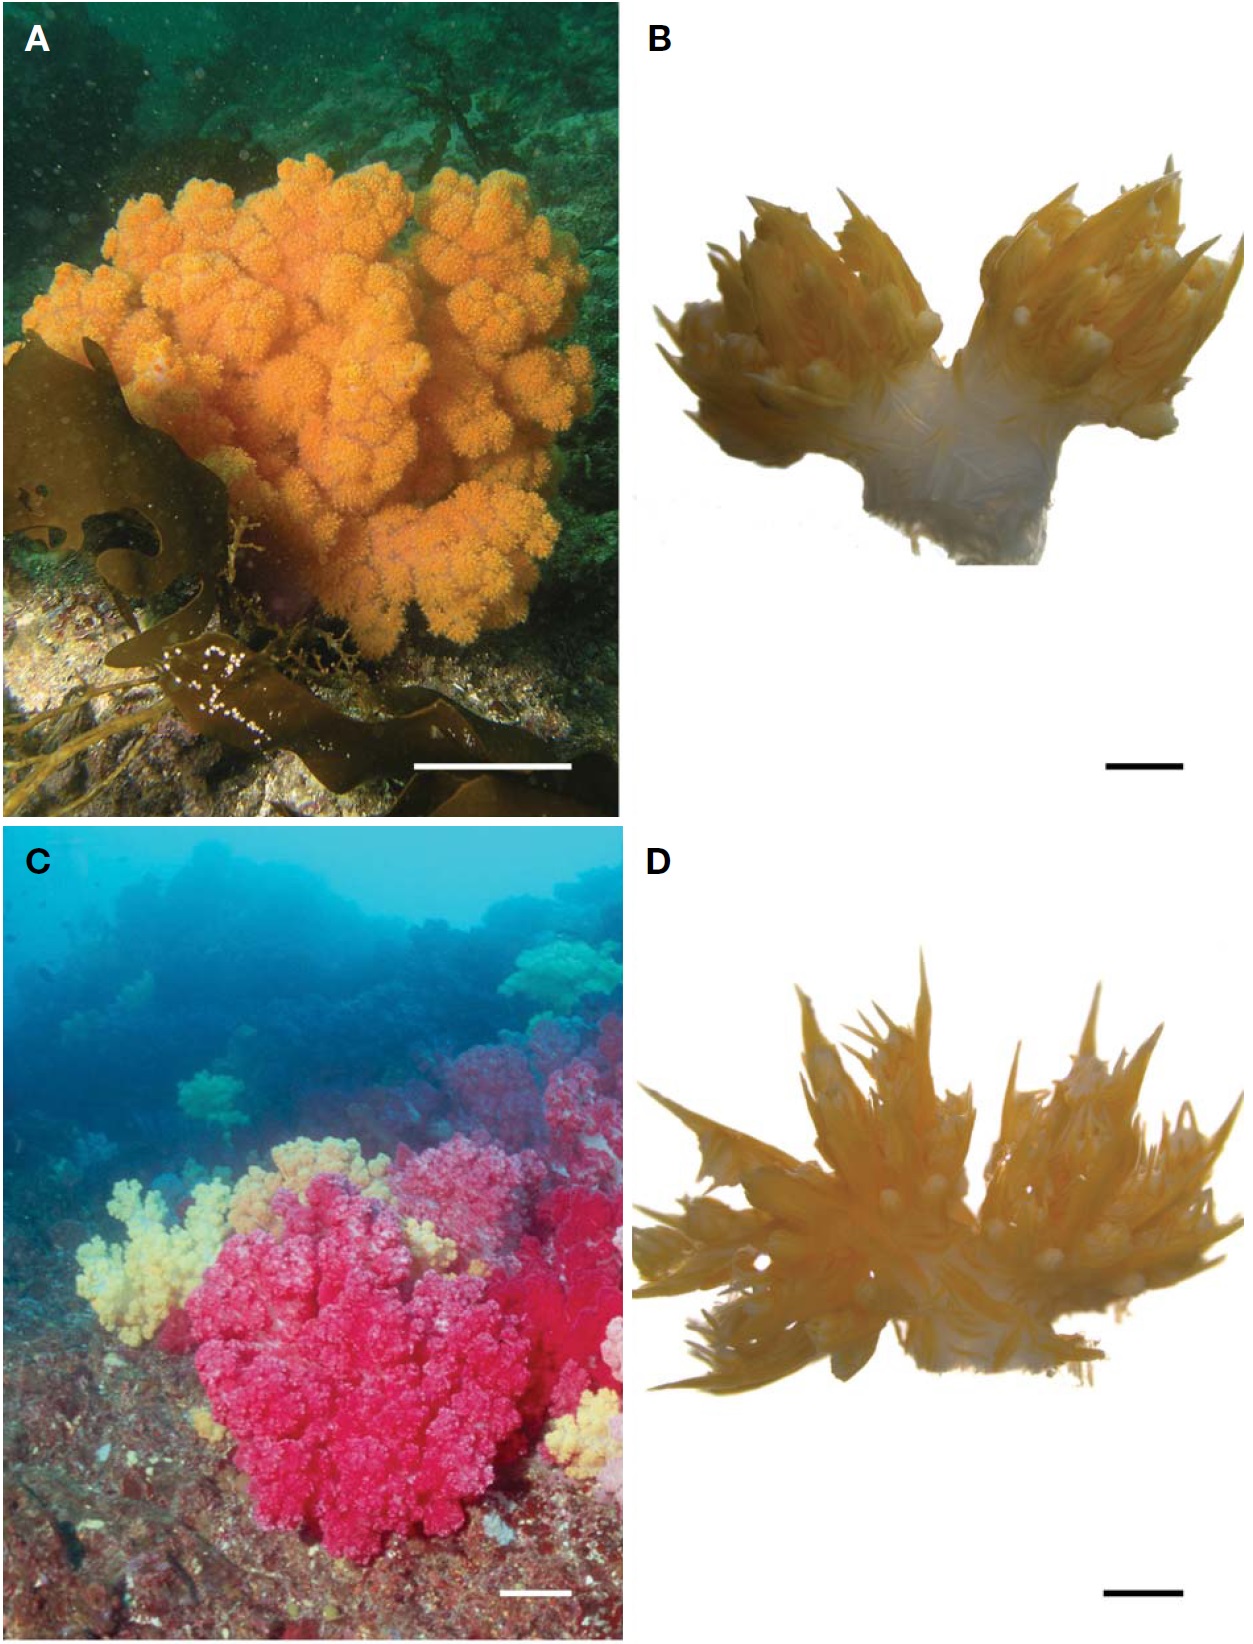 Colonies and polyp bundles of Dendronephthya (Dendronephthya) aurea (A, B) and D. (D.) koellikeri (C, D). A, Colony in expanded state; B, Polyp bundles; C, Pink and yellow colored colonies in expanded state; D, Polyp bundles. Scale bars: A, C=10 cm, B, D=1 mm.